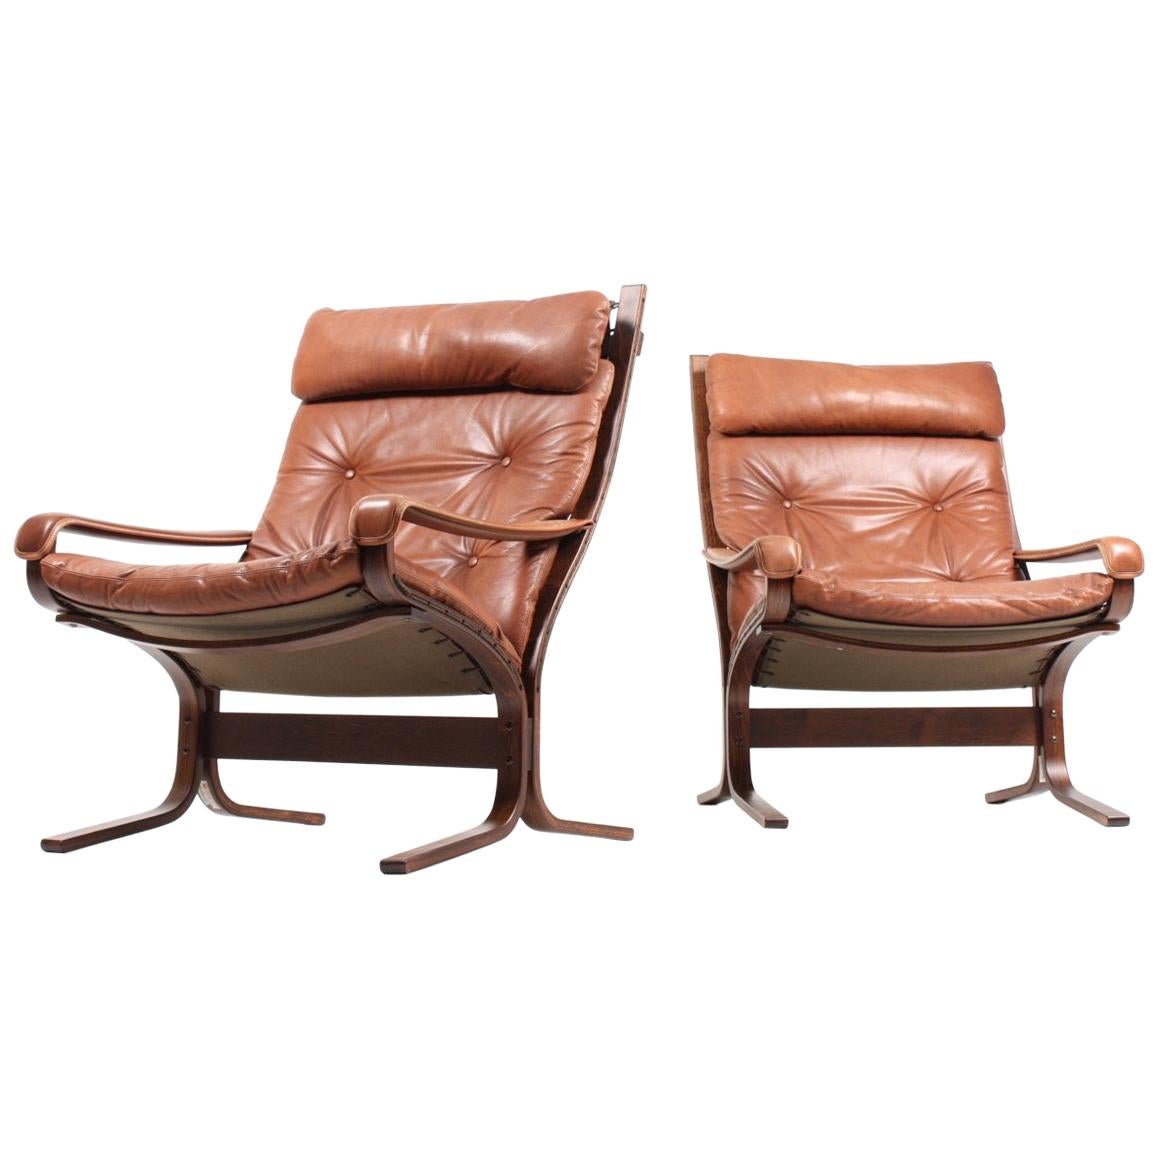 Pair of Midcentury Lounge Chairs in Leather by Ingmar Relling